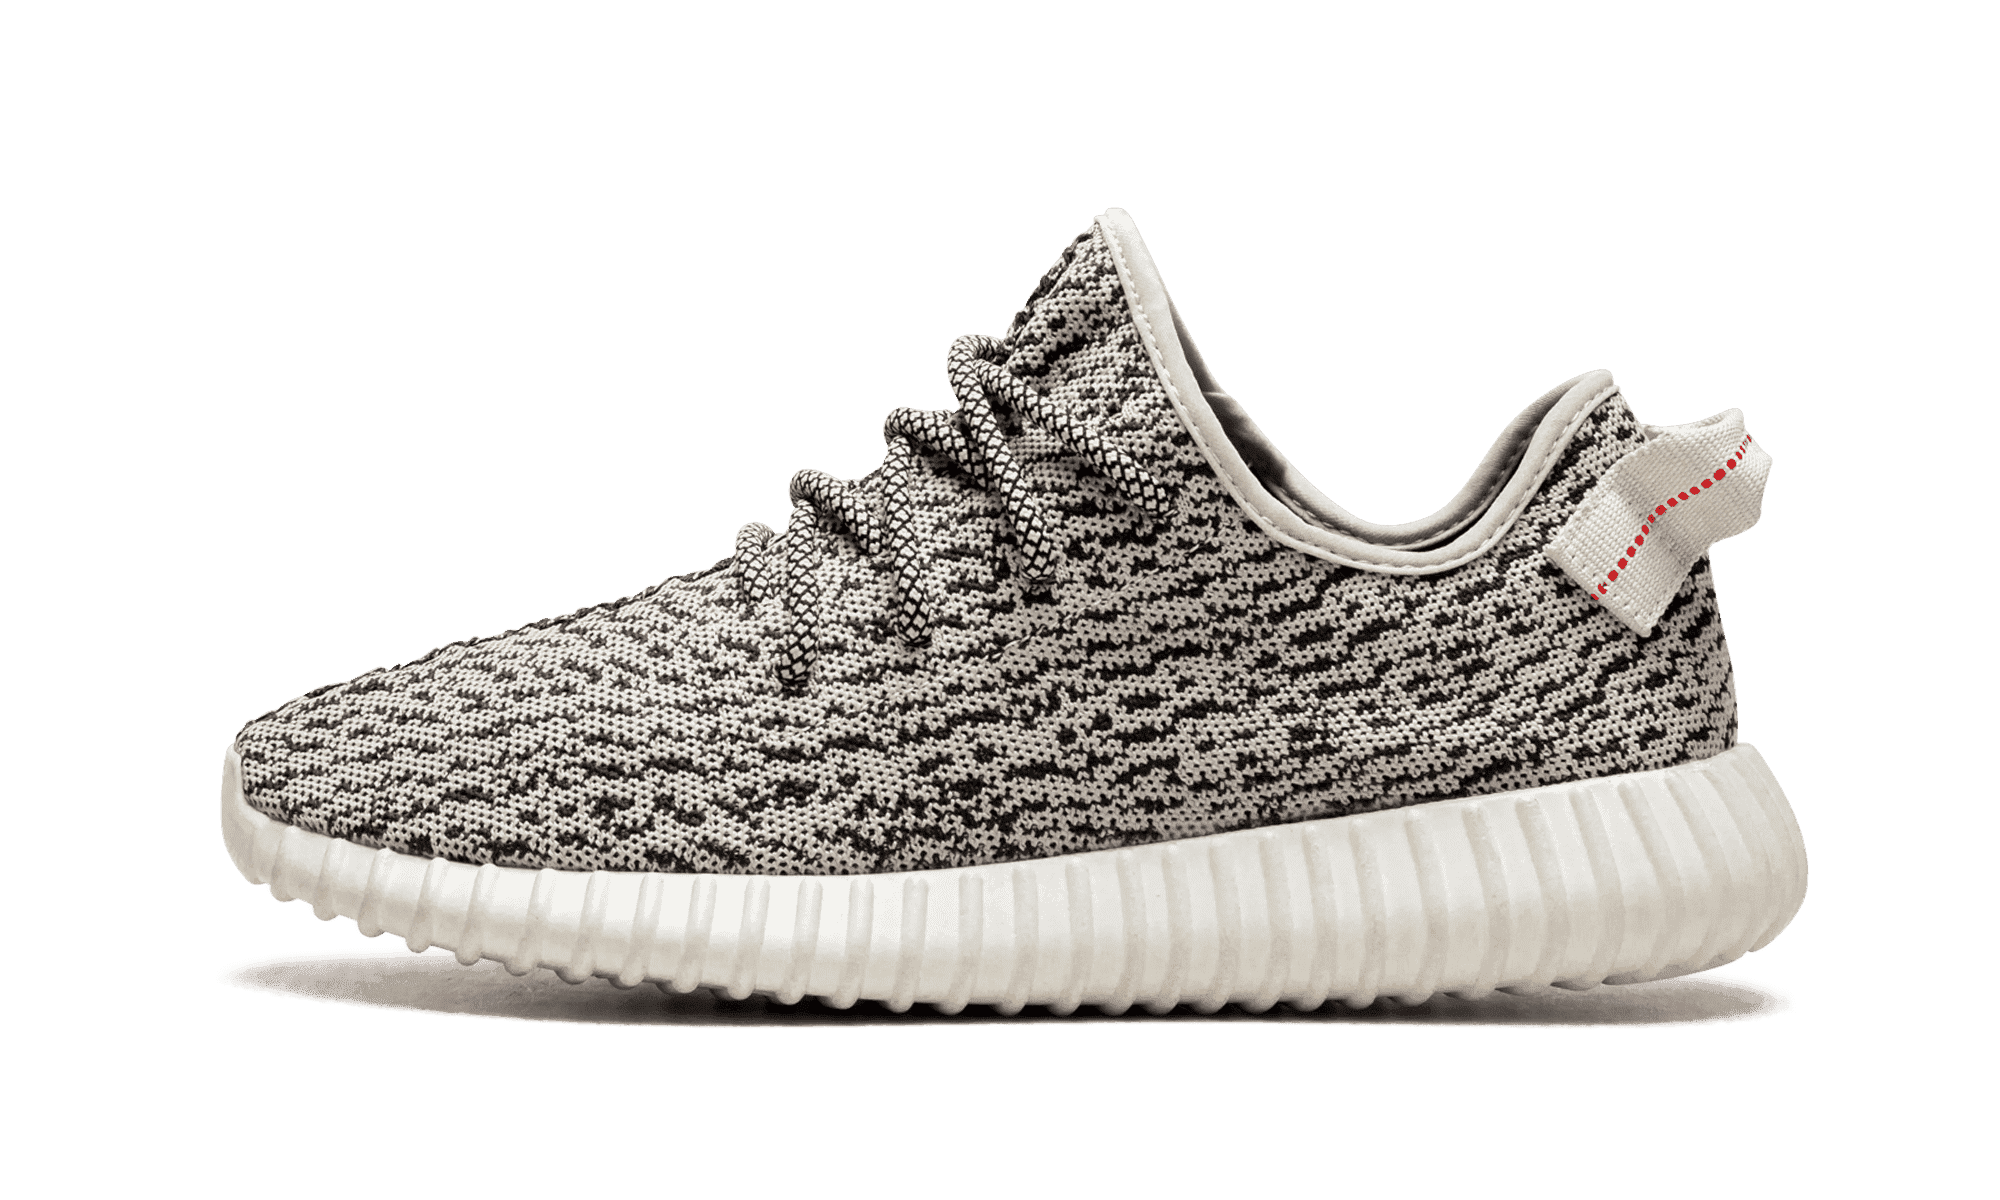 dove comprare le yeezy boost 350